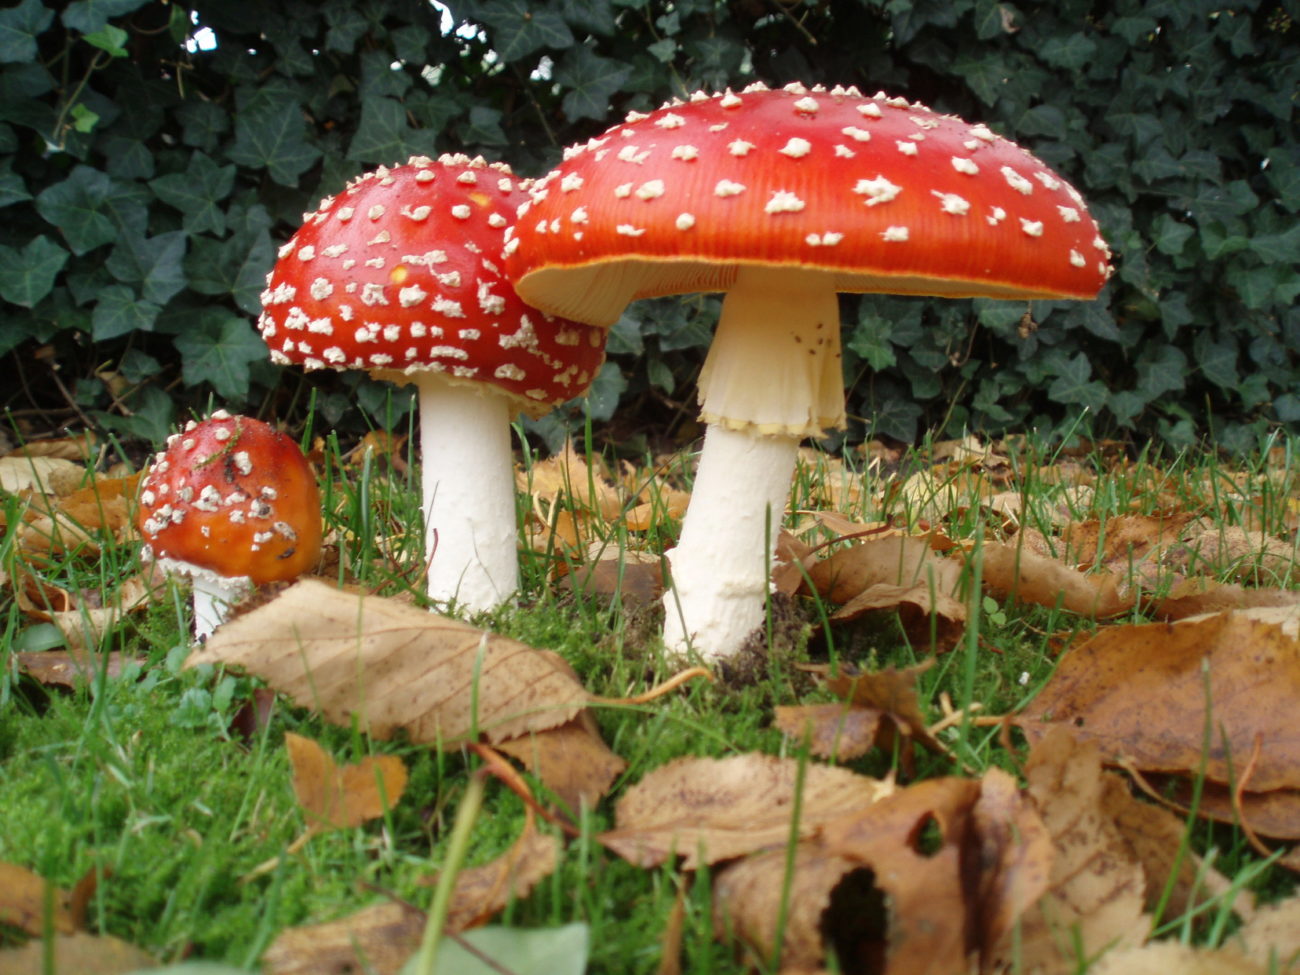 Amatoxin This toxic substance is derived from the Amanita mushrooms....